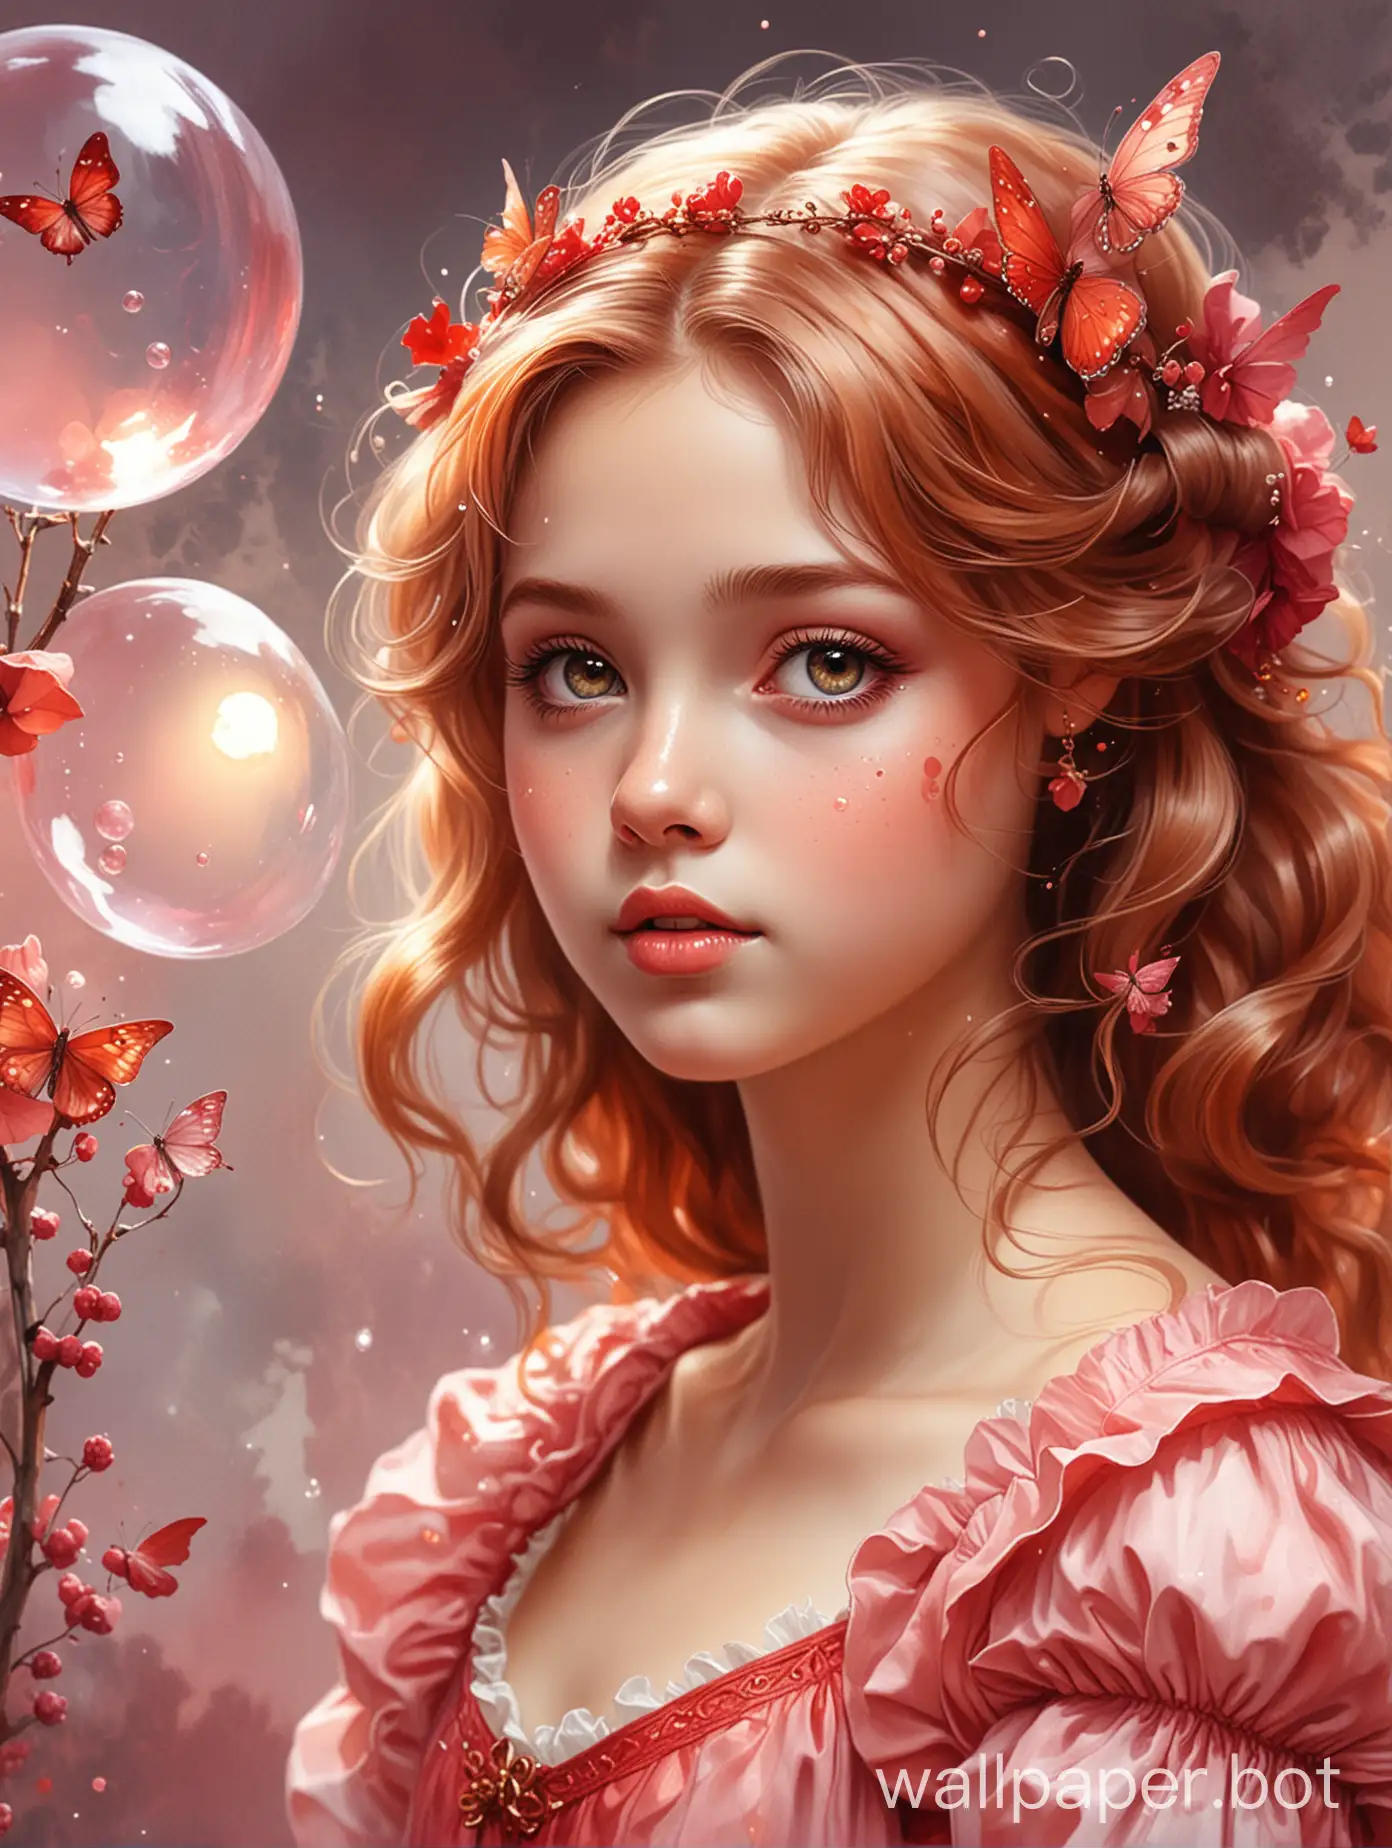 Soap bubbles, cotton clouds, on watercolor shades of crimson, burgundy and other reds| half body|lovely young butterfly fairy princess looking at me with big (light brown highly detailed eyes), shadow play| dynamic pose| fairy tale, a beautiful fantasy loved by children and adults, ultra-high detail, high quality, Artstation, perfect centered composition, watercolor ink.